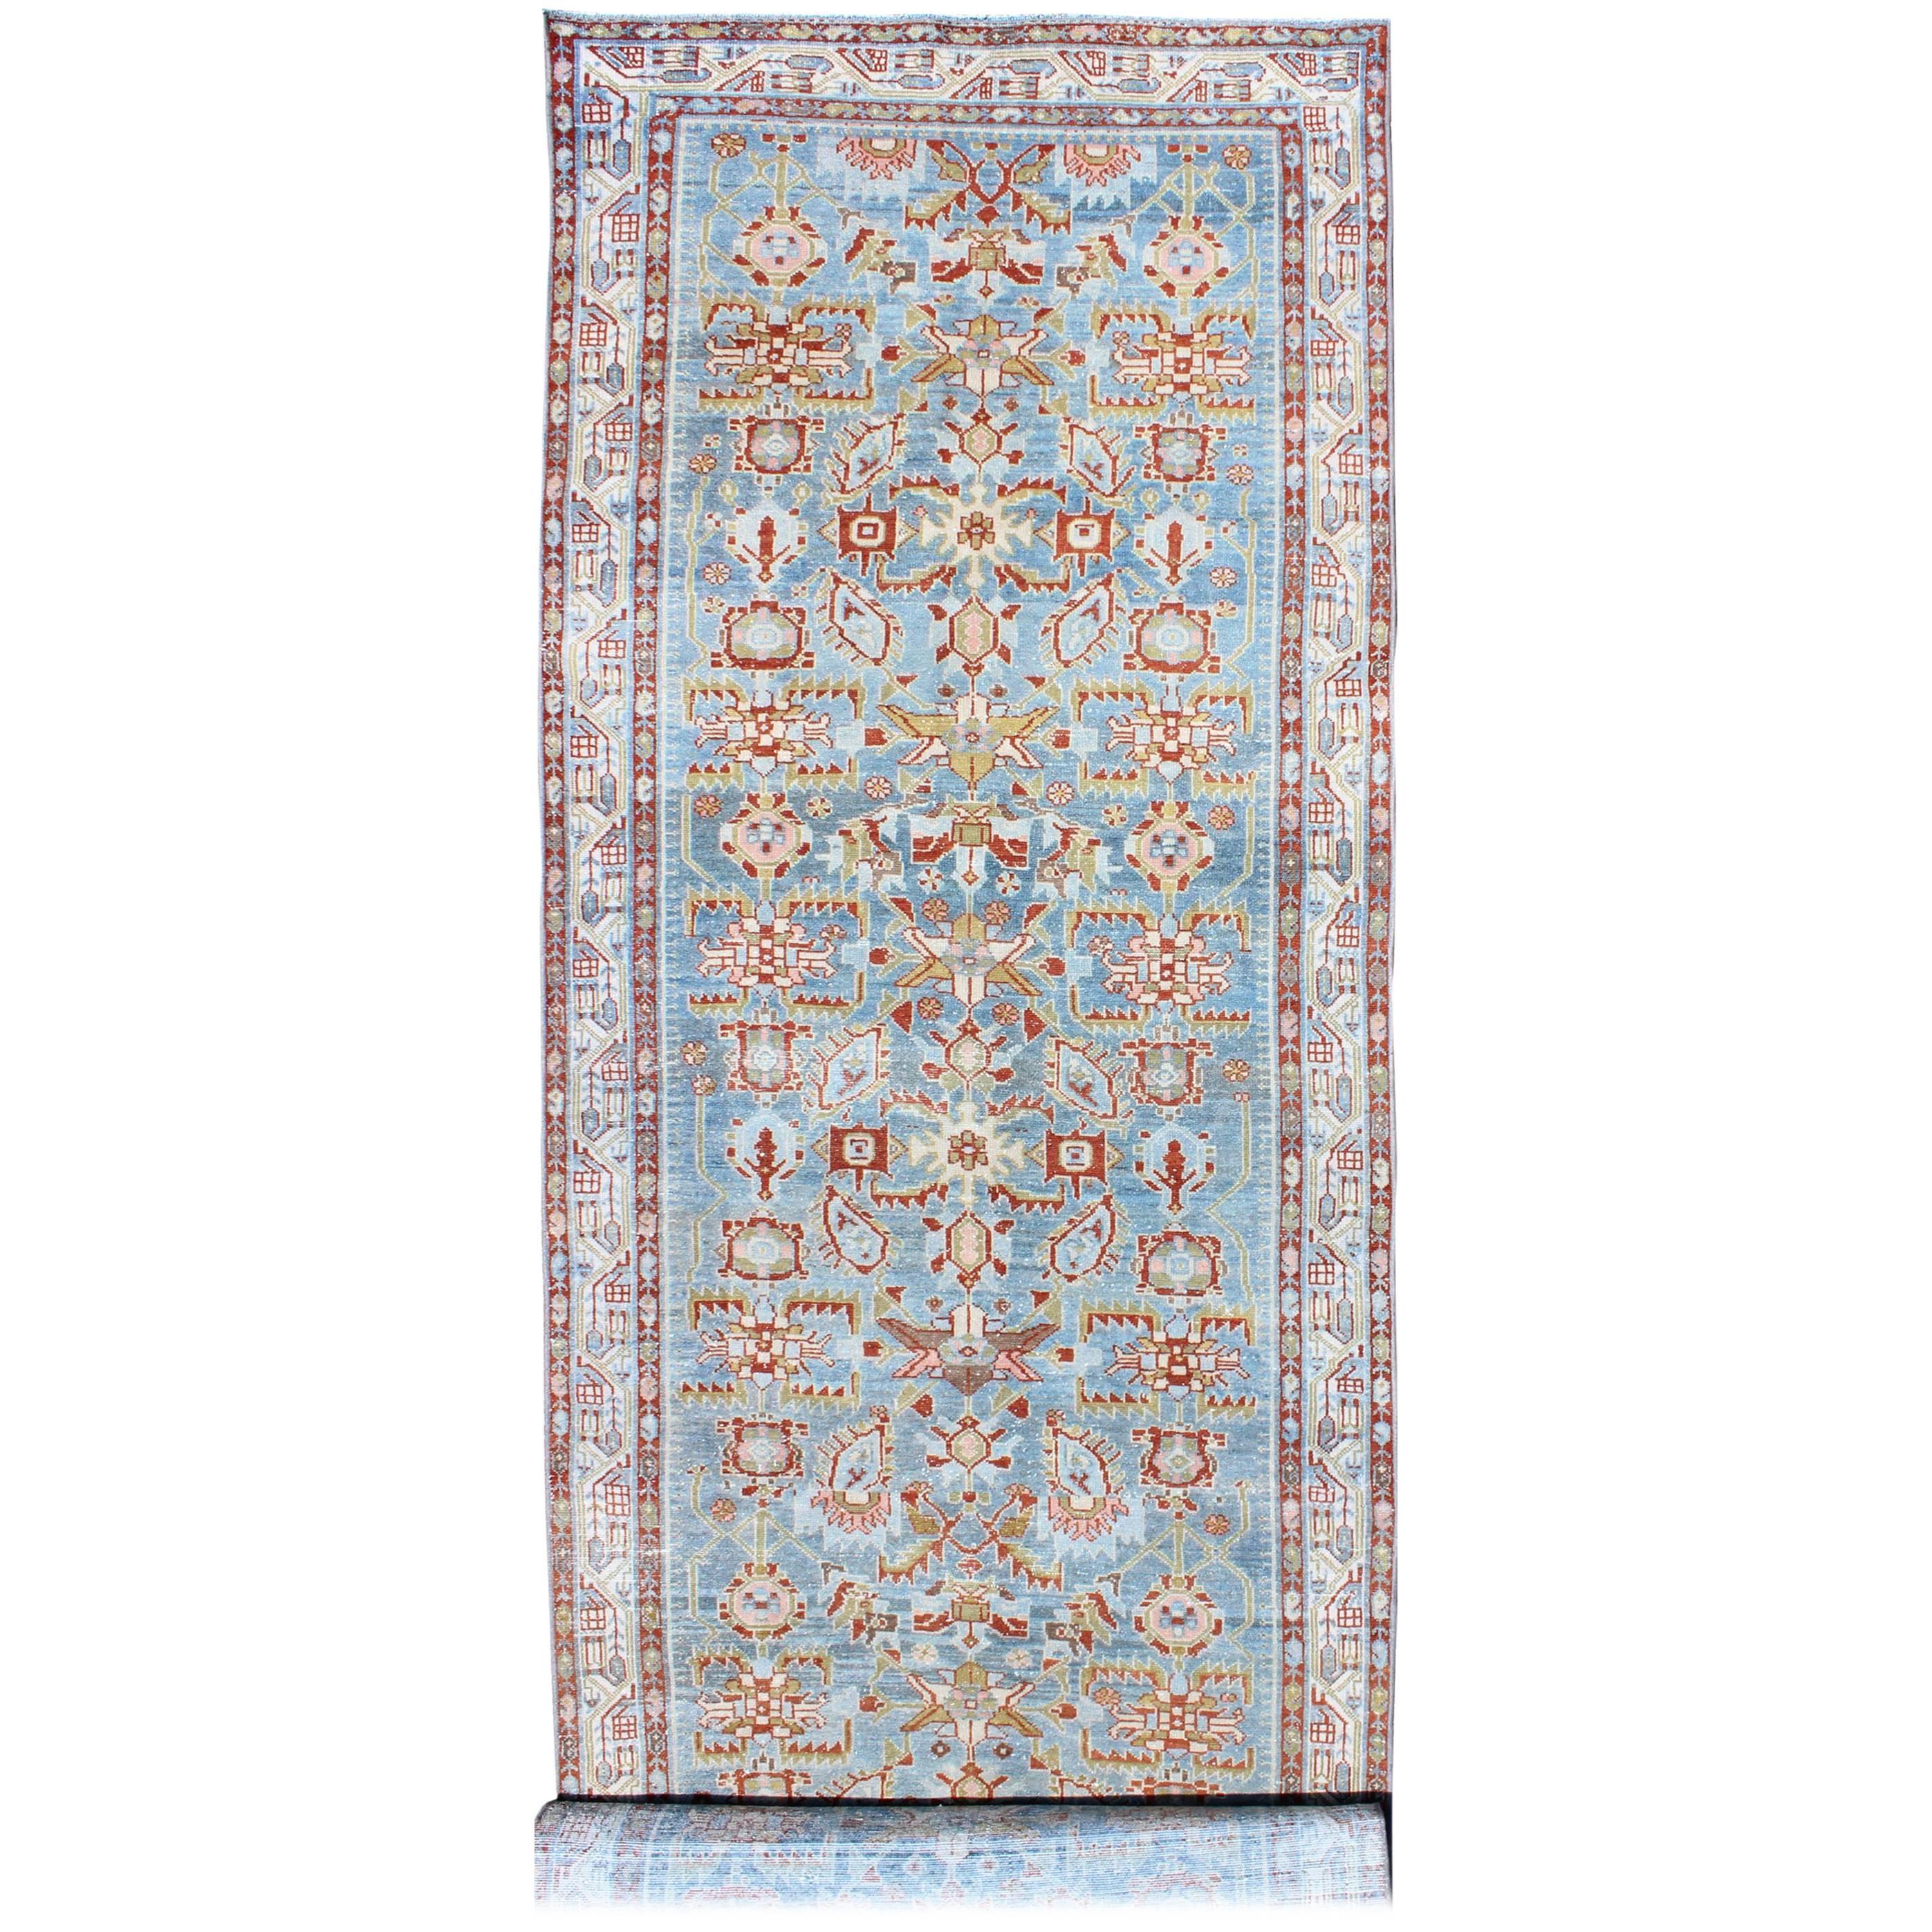 Antique Persian Malayer Runner with Geometrics in Light Blue, Red and Green